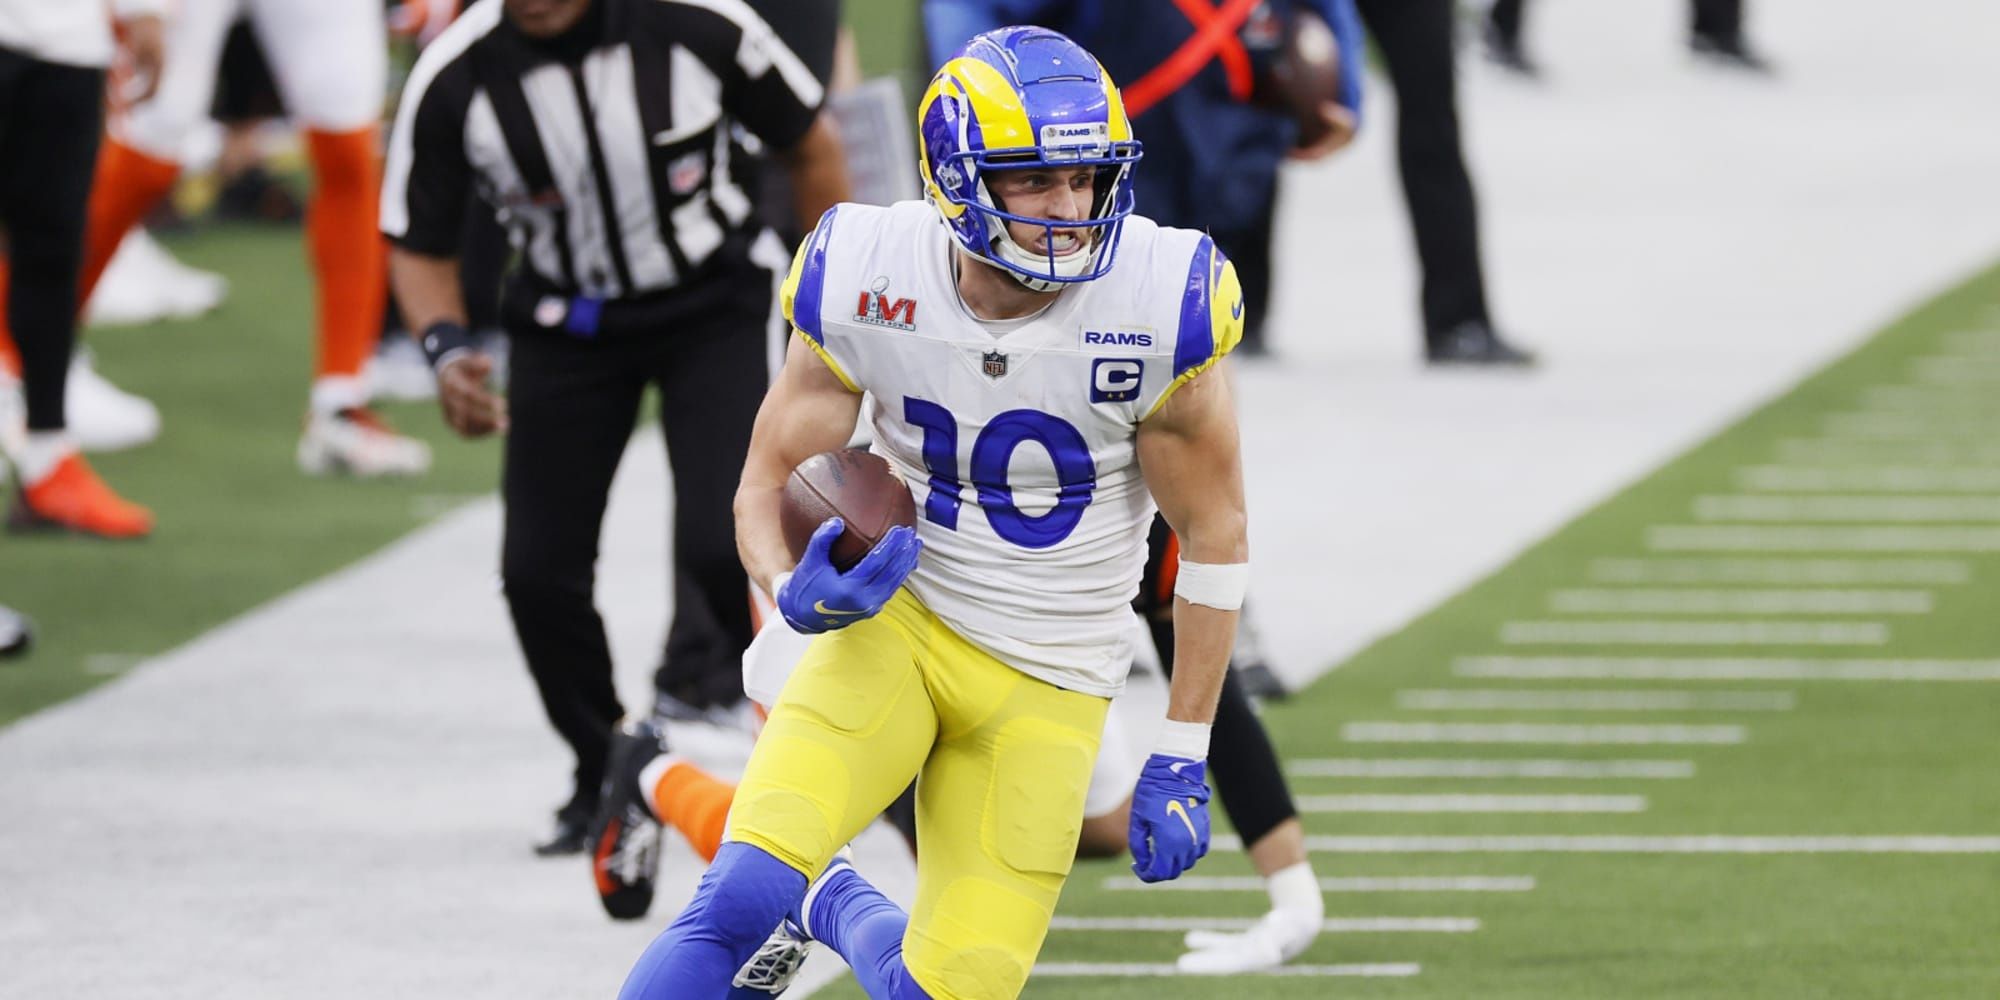 Cooper Kupp running with the ball down the right sideline in a white, blue, and yellow Rams jersey